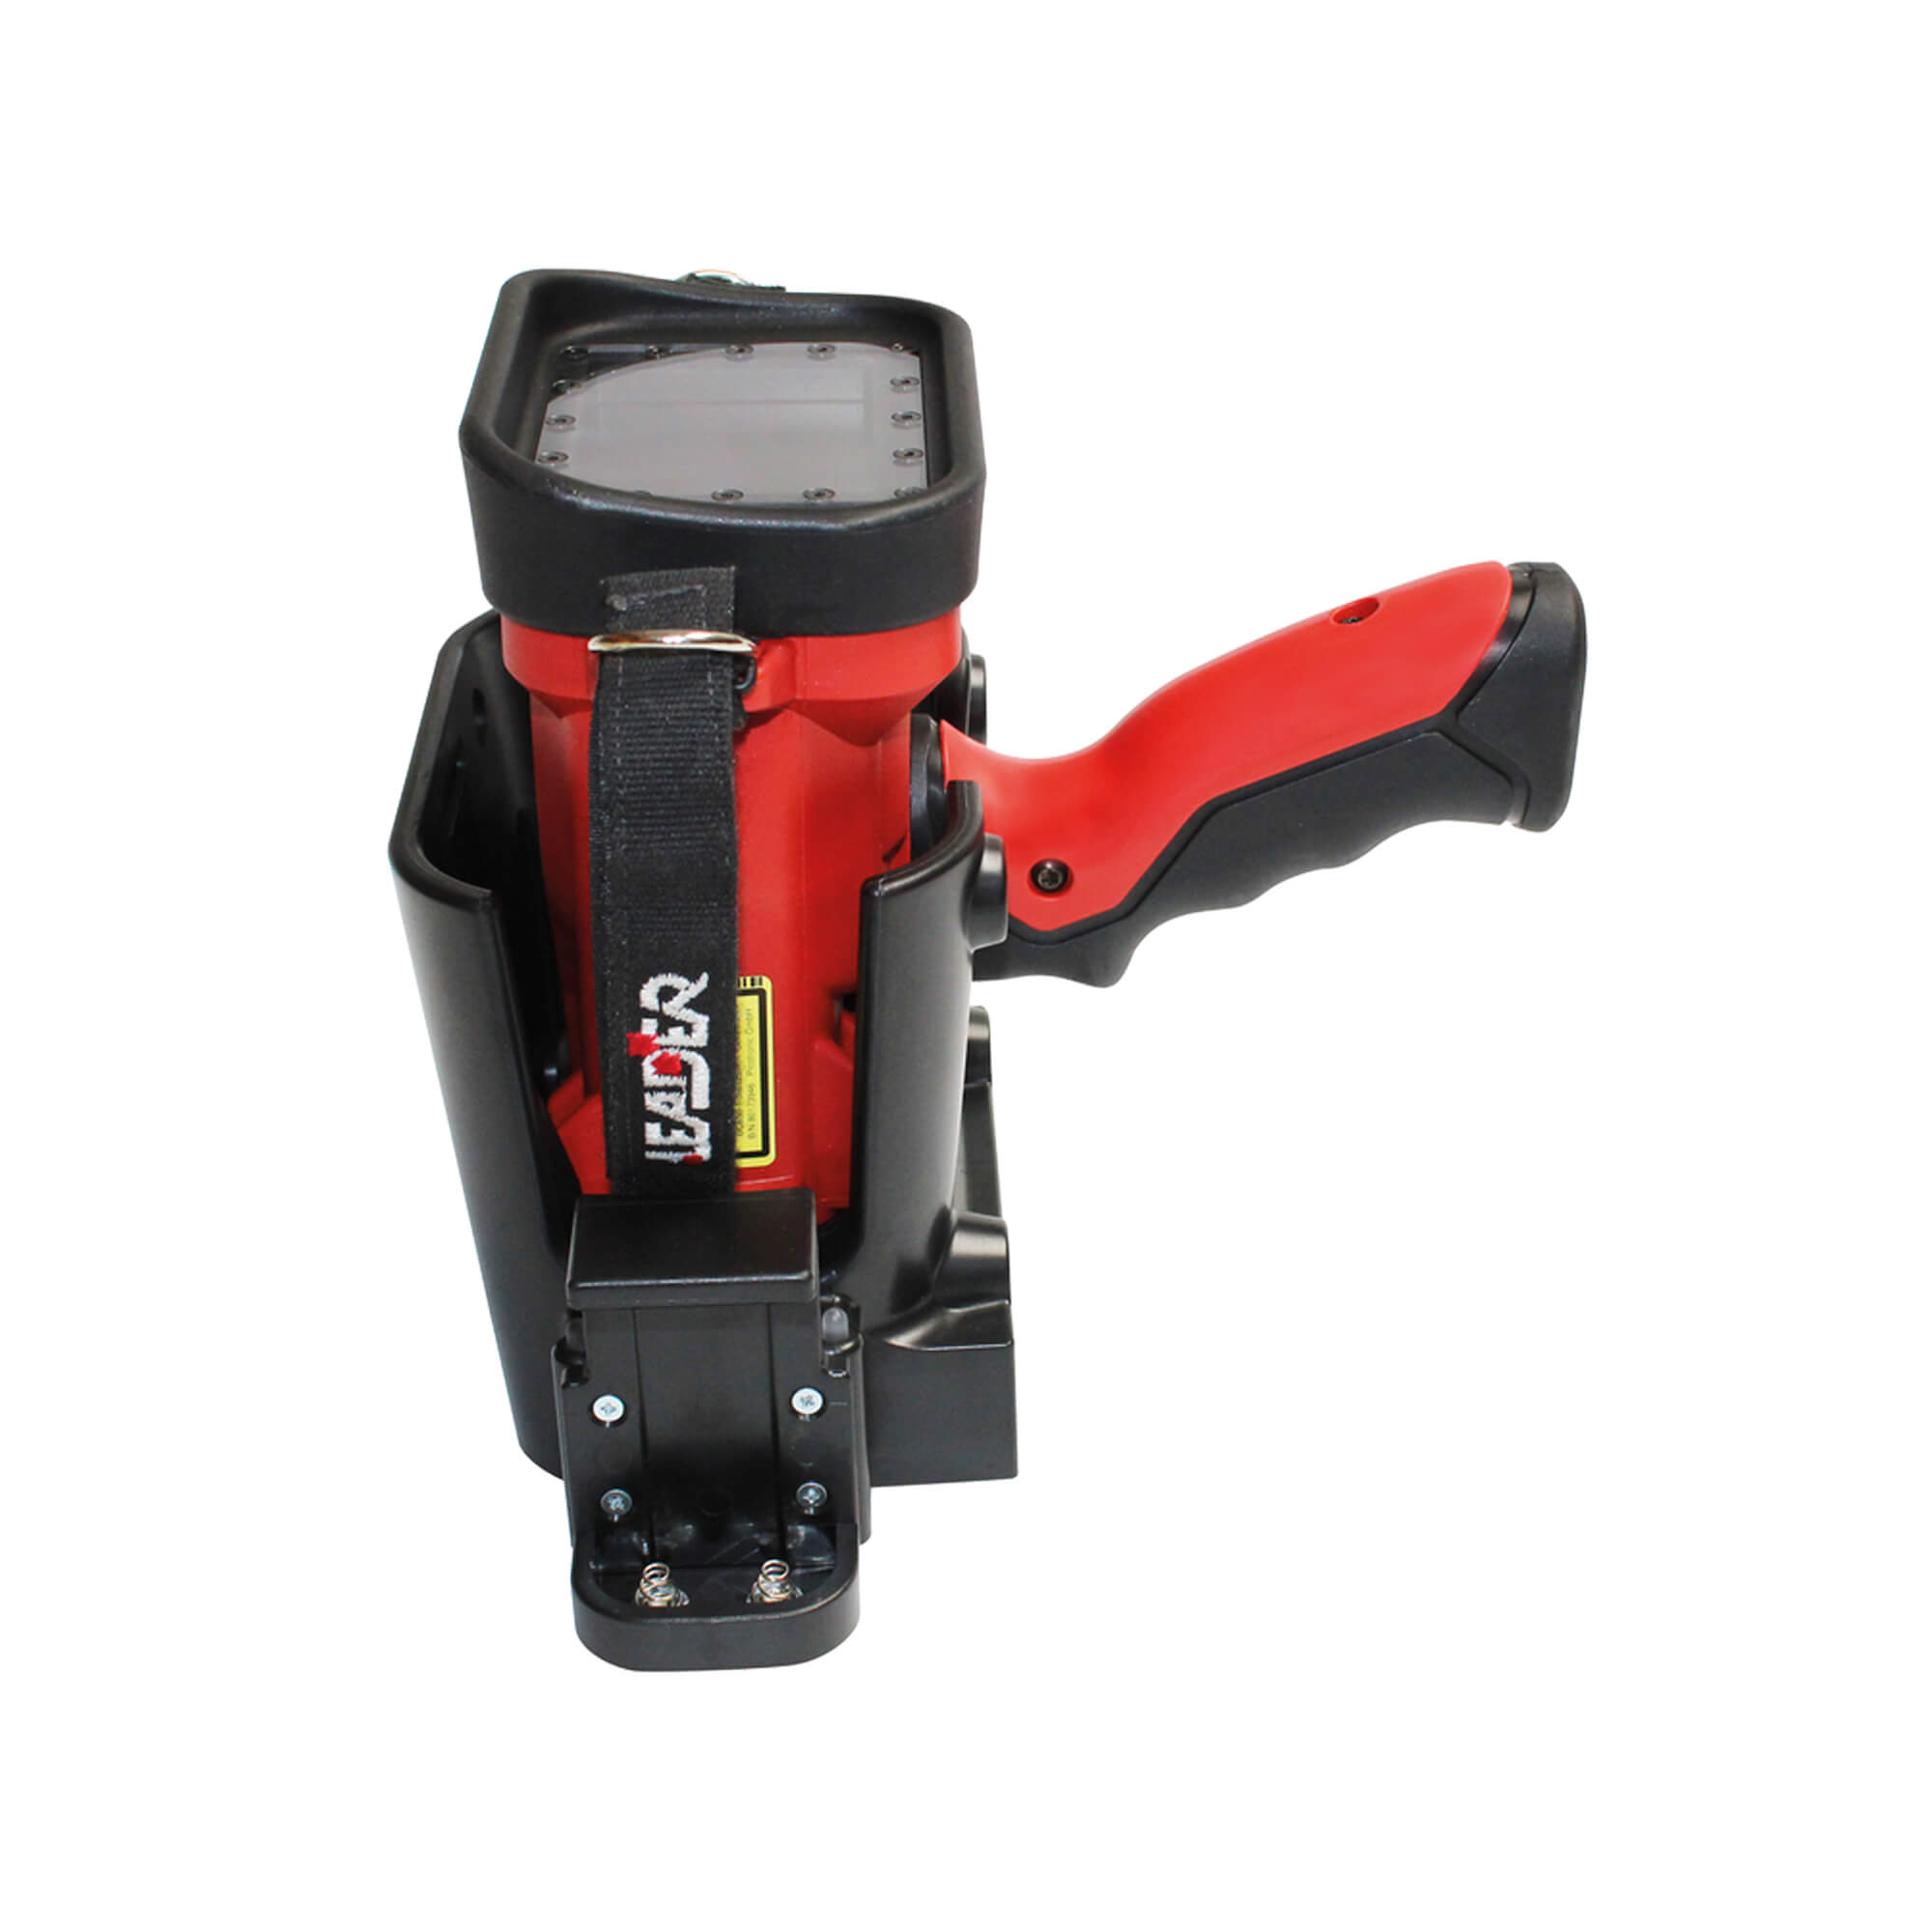 Thermal imaging cameras Charge base for Leader TIC 3.1 / 3.3 / 4.1 / 4.3